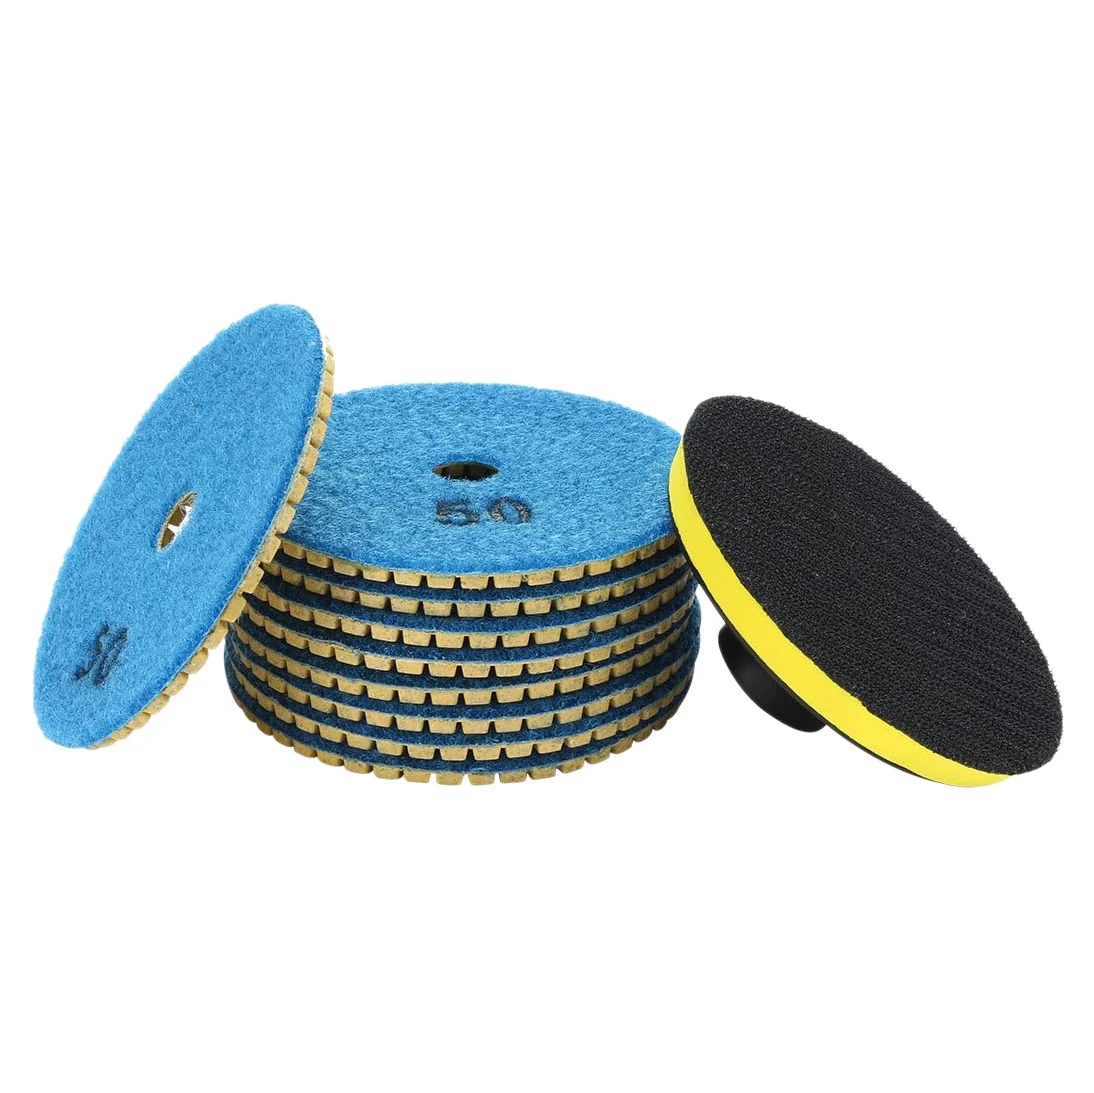 4Inch Diamond Polishing Pads Wet Buffing For Granite Stone Concrete Marble 100mm 